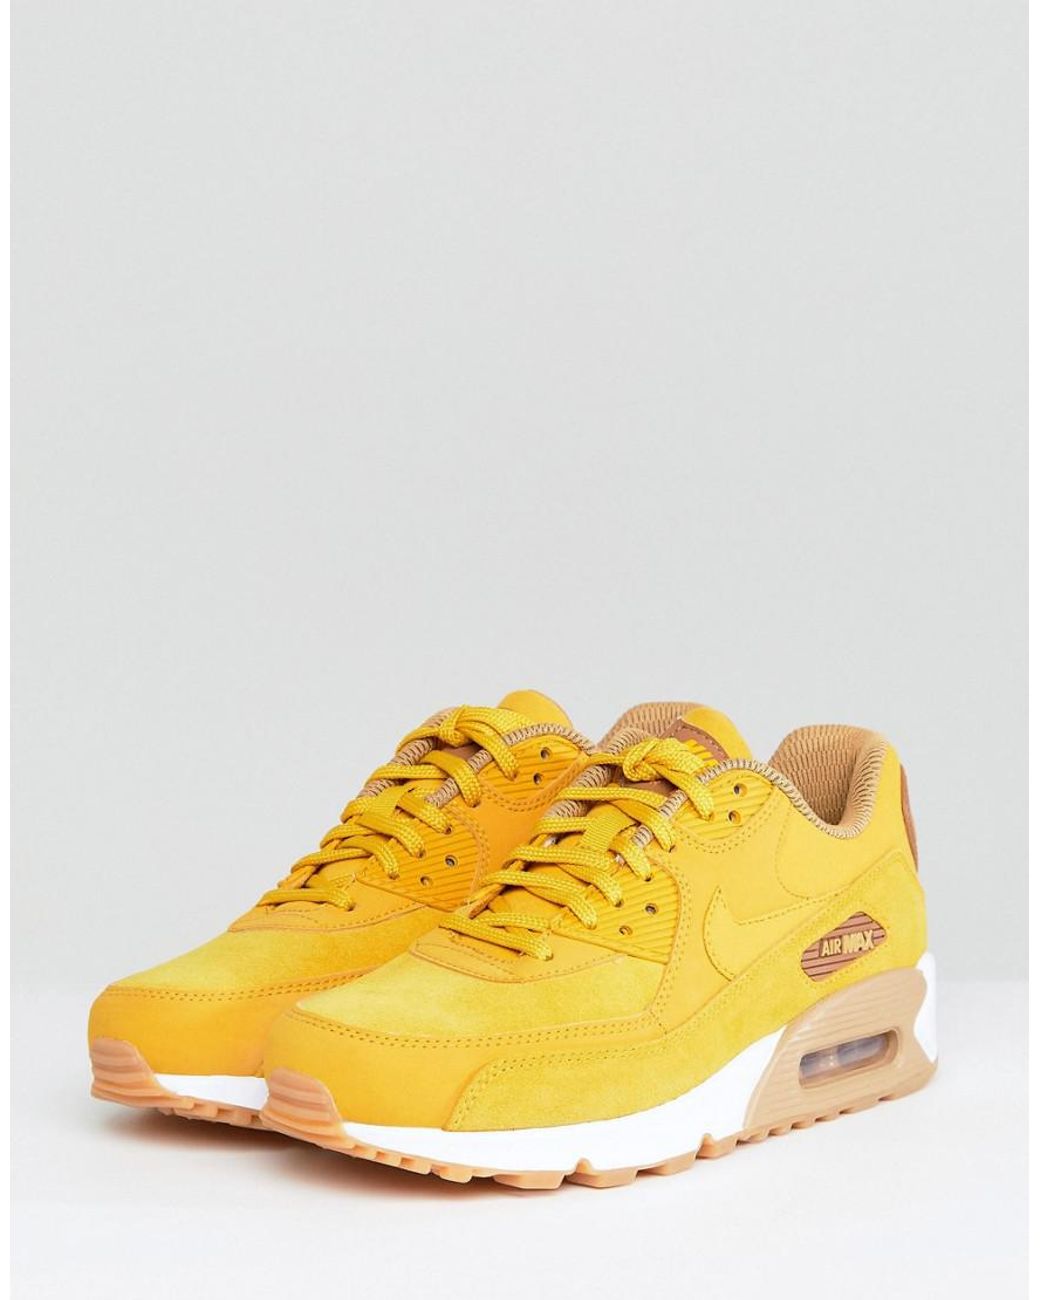 Nike Air Max Mustard Suede Trainers With Gum Sole in Yellow | Lyst Australia